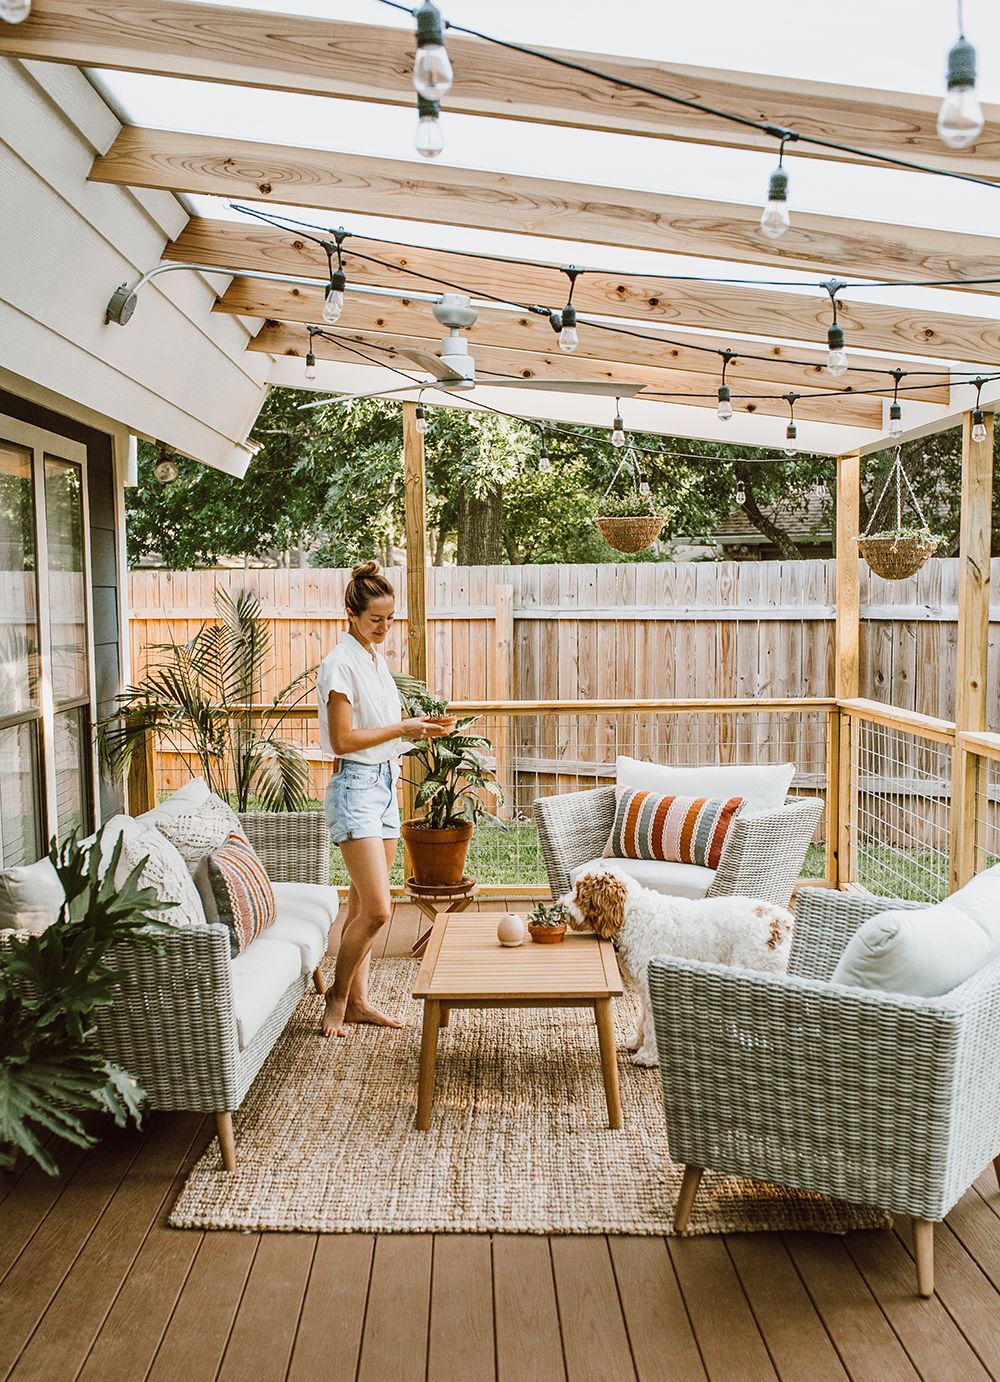 Covered Patio Ideas to Create the
  Ultimate Outdoor Living Space